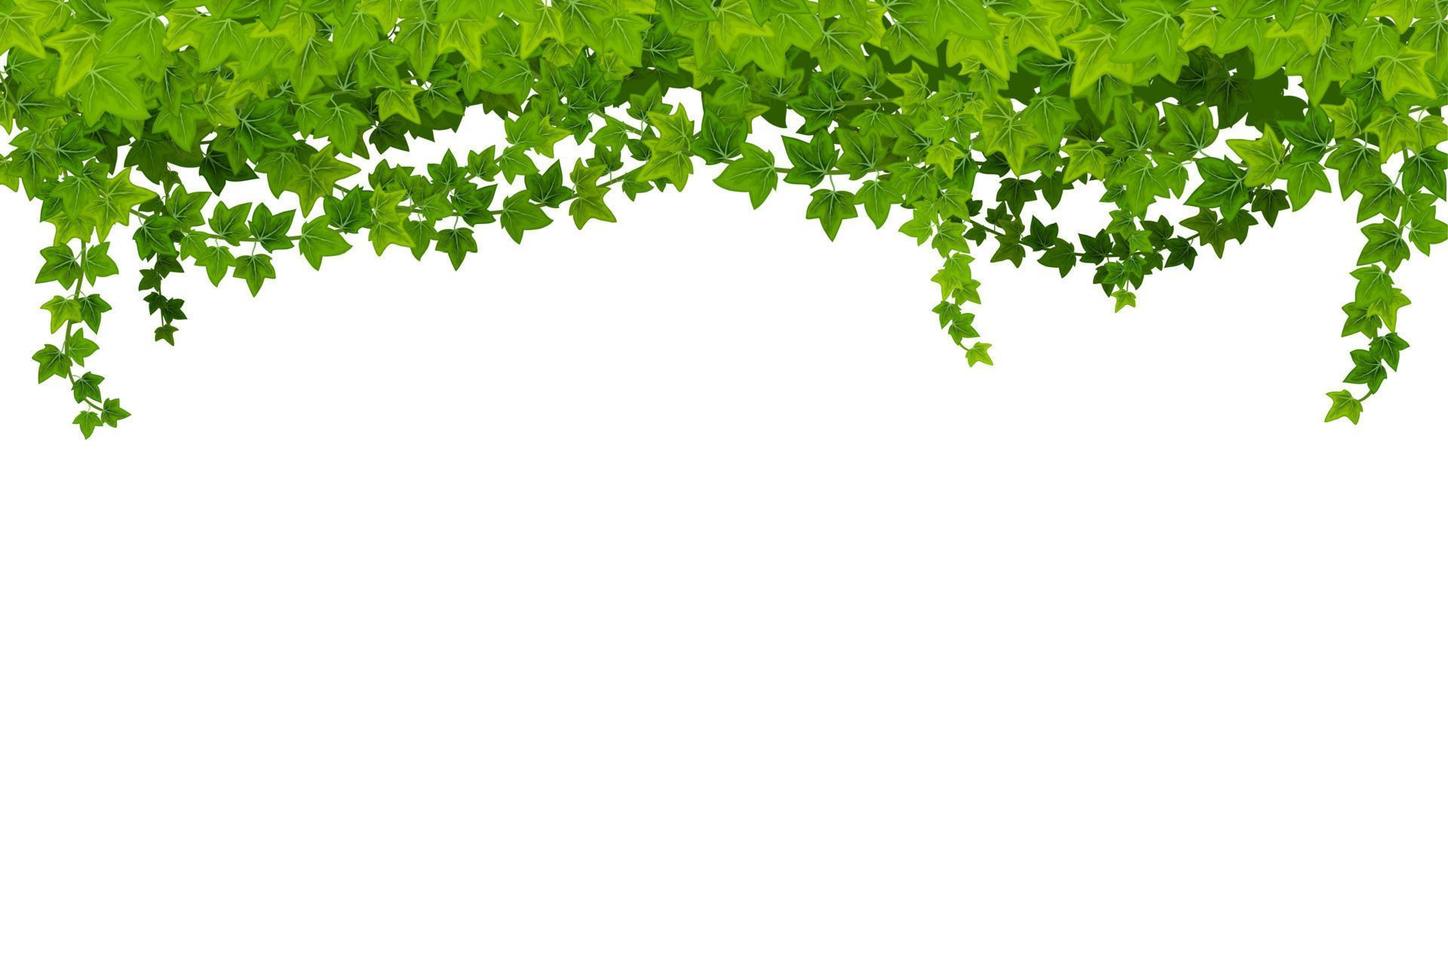 Ivy lianas with green leaves, vector background